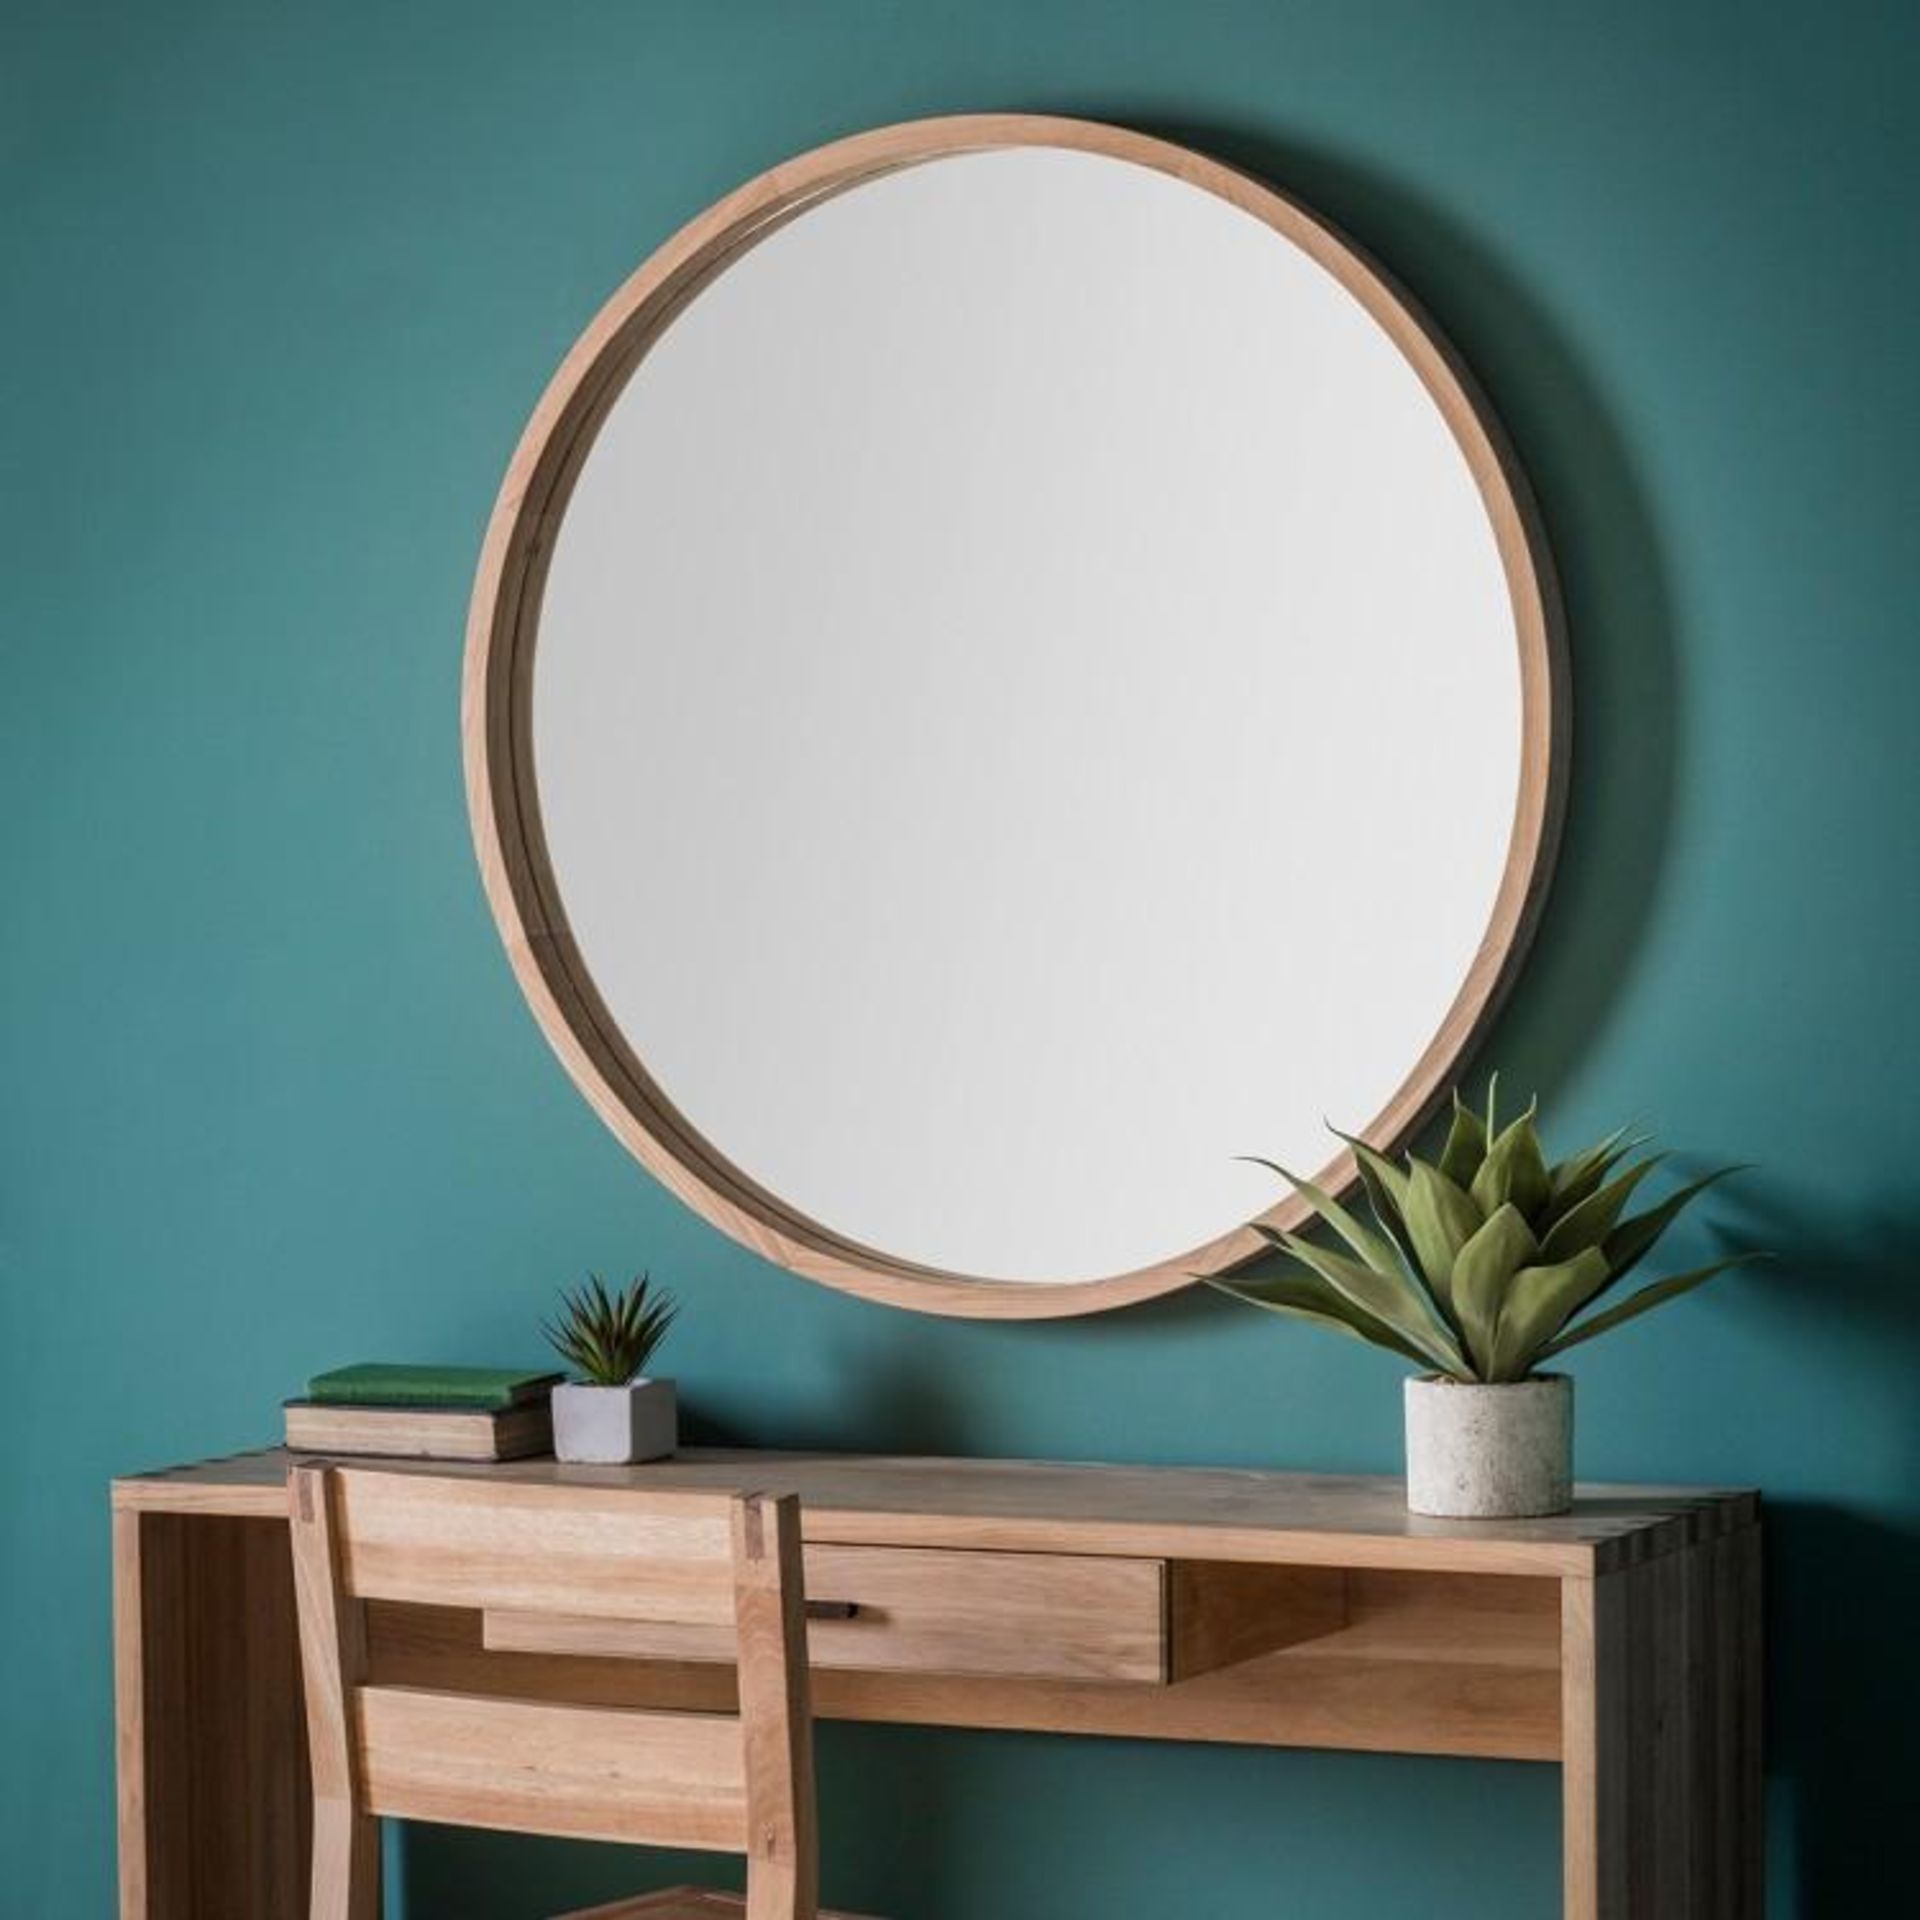 Bowman Mirror Large 1000mm Solid American Oak framed mirror for contemporary and ageless style